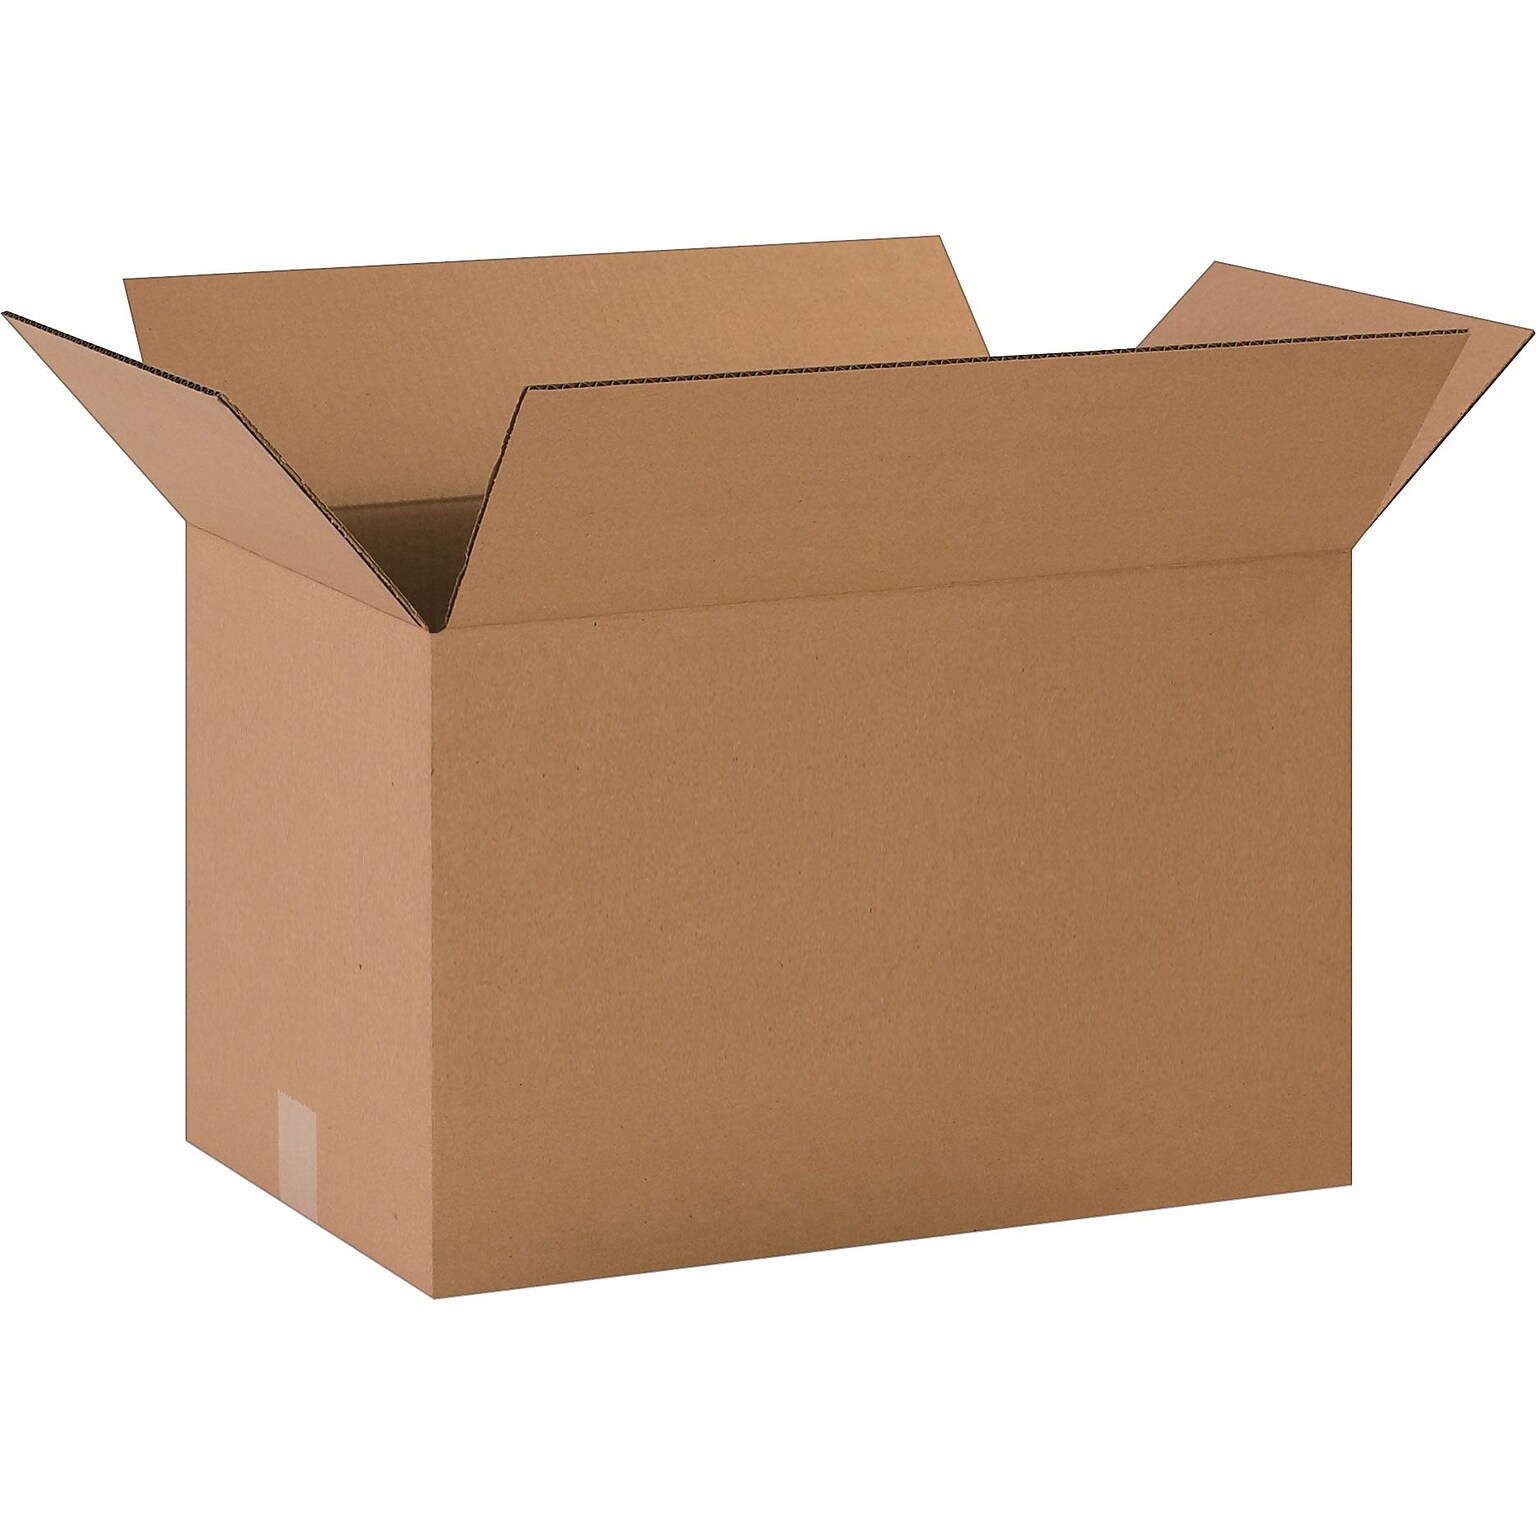 7 x 7 x 7, 32 ECT, Shipping Boxes